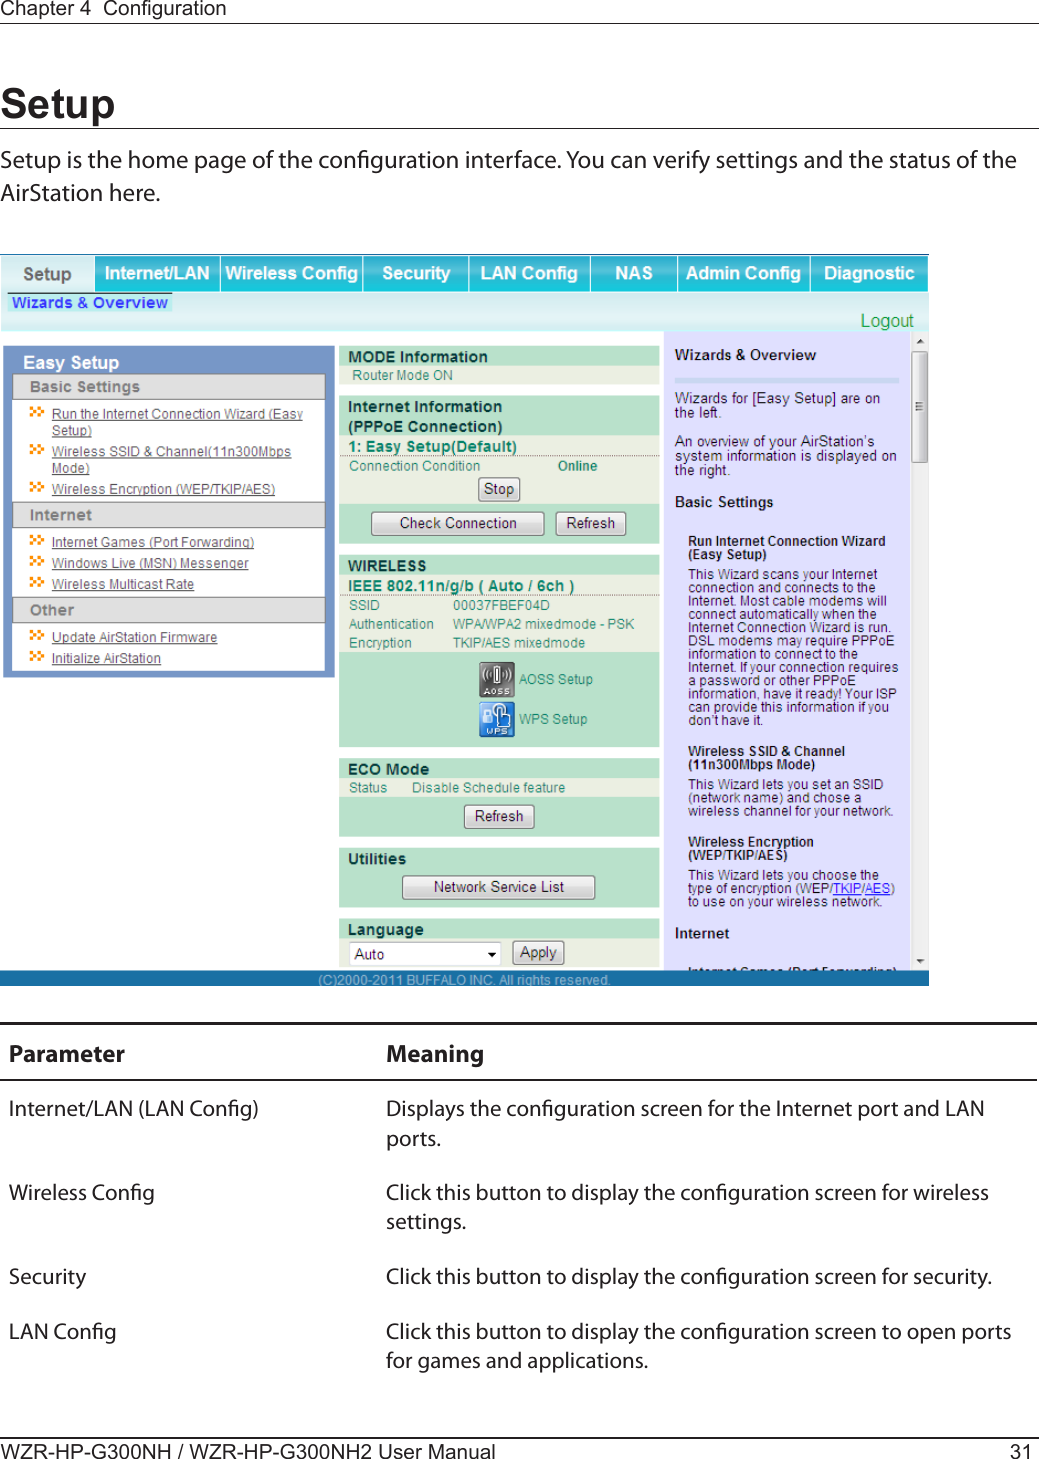 Chapter 4  CongurationWZR-HP-G300NH / WZR-HP-G300NH2 User Manual 31SetupSetup is the home page of the conguration interface. You can verify settings and the status of the AirStation here.Parameter MeaningInternet/LAN (LAN Cong) Displays the conguration screen for the Internet port and LAN ports.Wireless Cong Click this button to display the conguration screen for wireless settings.Security Click this button to display the conguration screen for security.LAN Cong Click this button to display the conguration screen to open ports for games and applications.